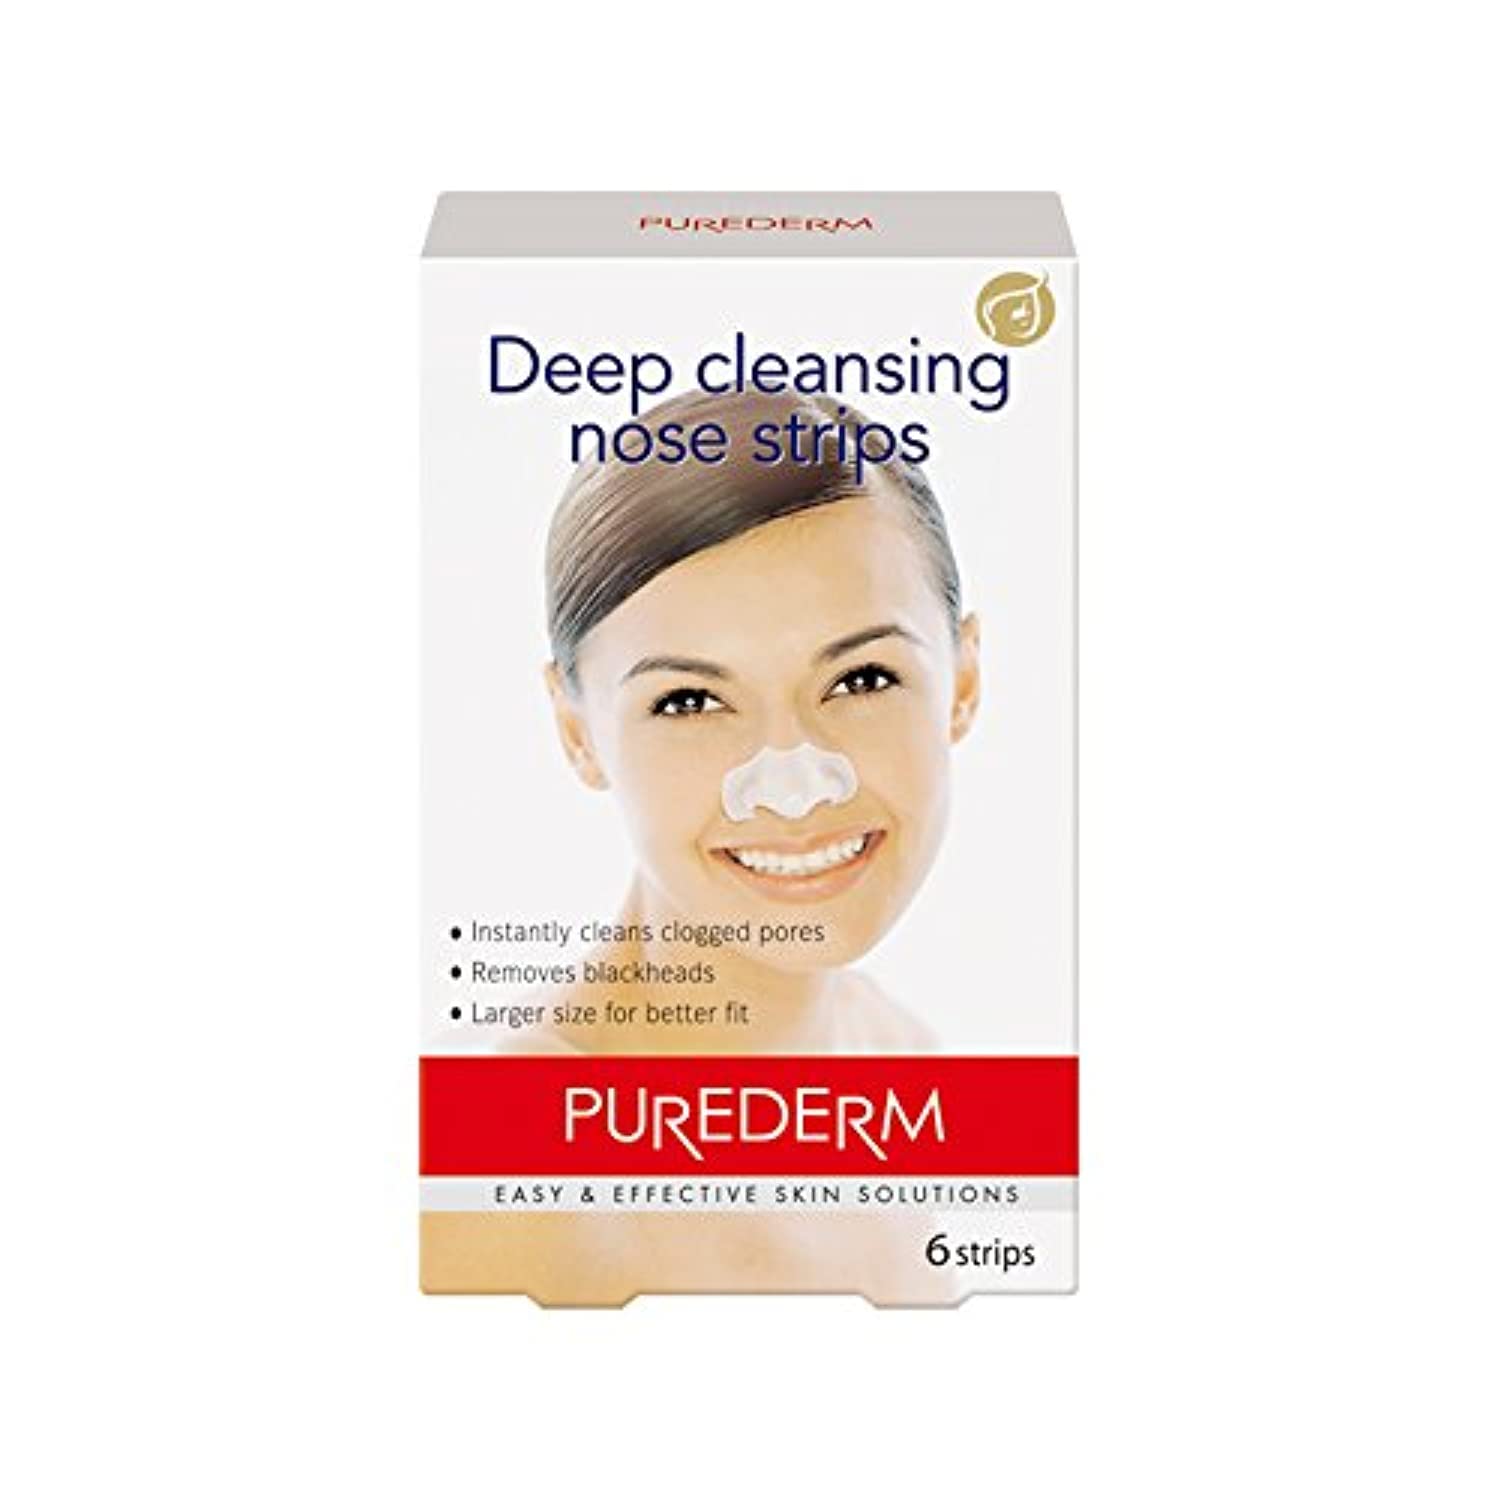 Purederm Deep Cleansing Nose Pore Strips (contains 6 strips)